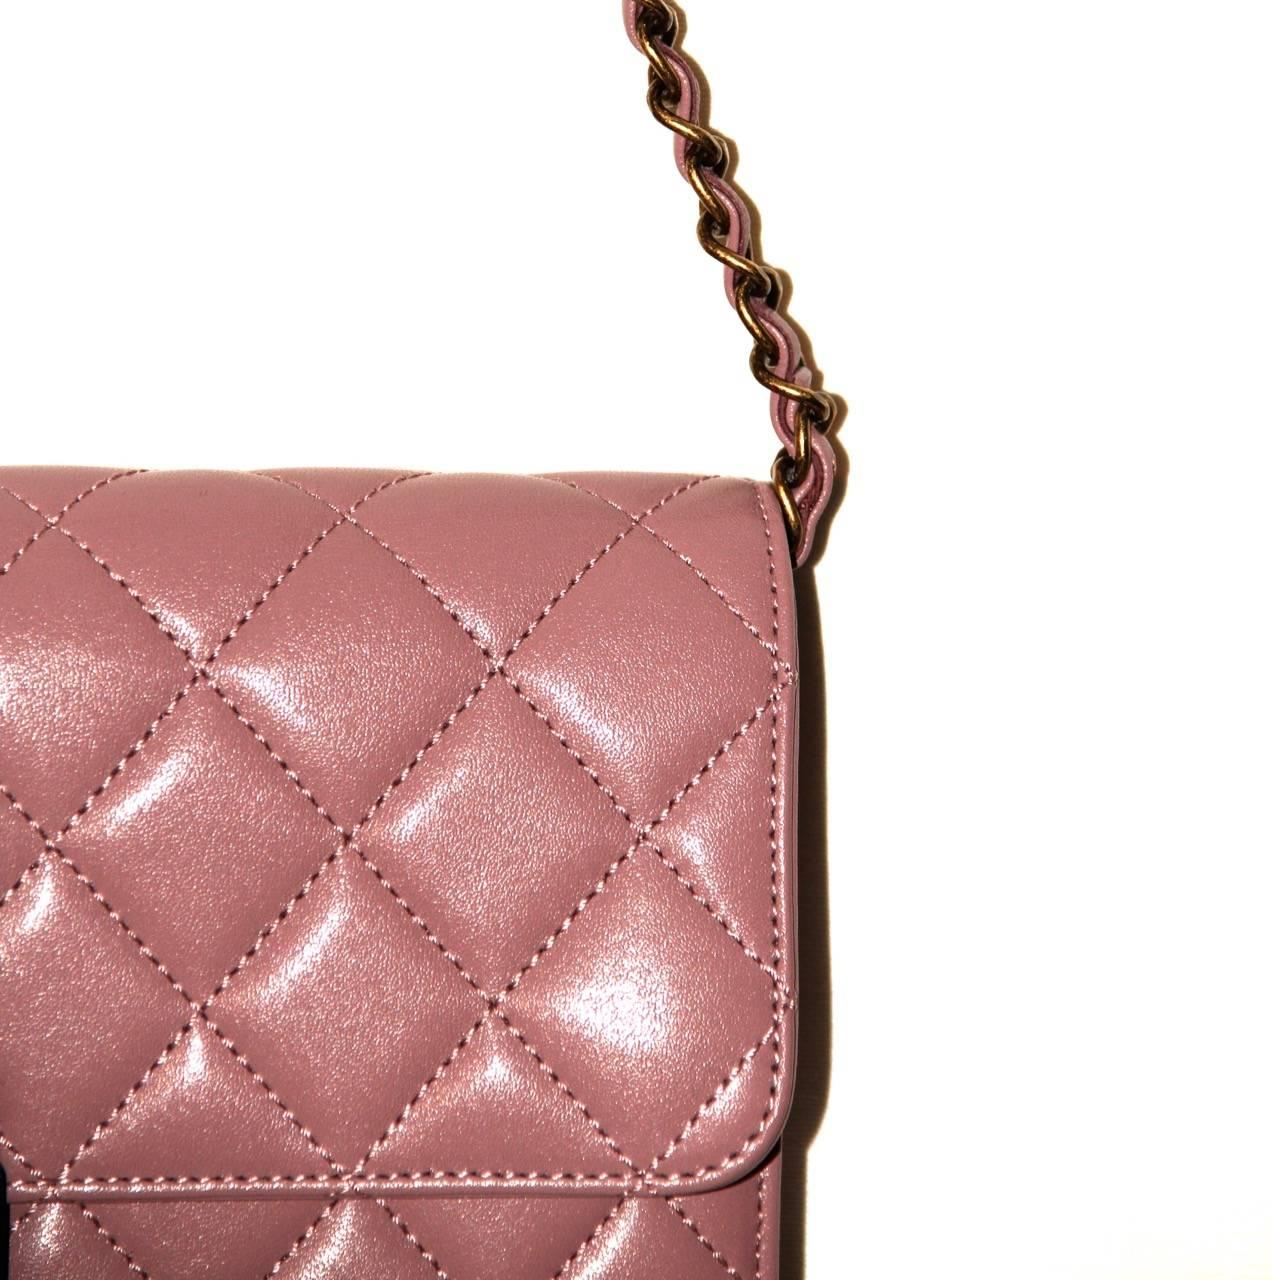 CHANEL Beauty Lock Collection Old Pink Sheepskin Leather Flap Bag  3